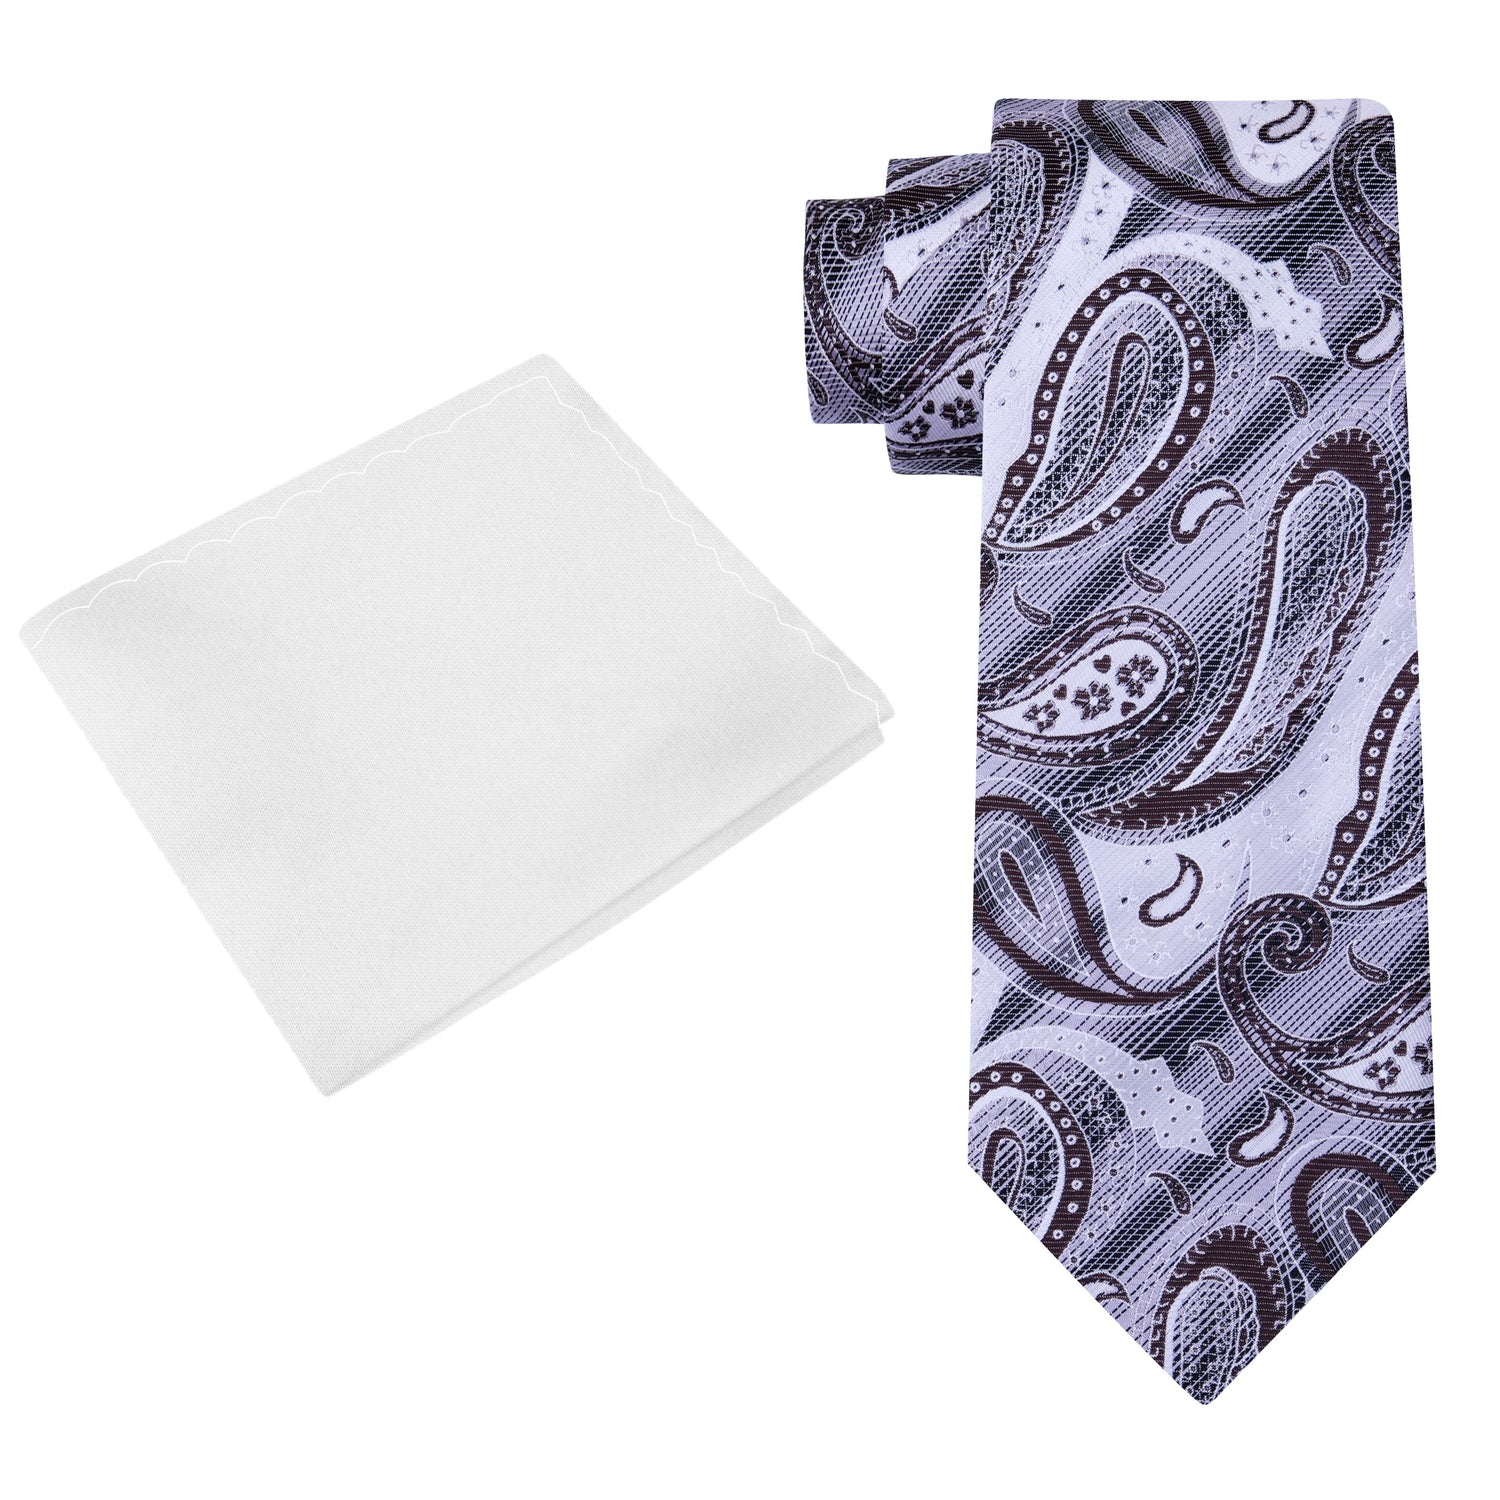 Alt view: A White, Grey, Brown Paisley Pattern Silk Necktie, With White Pocket Square